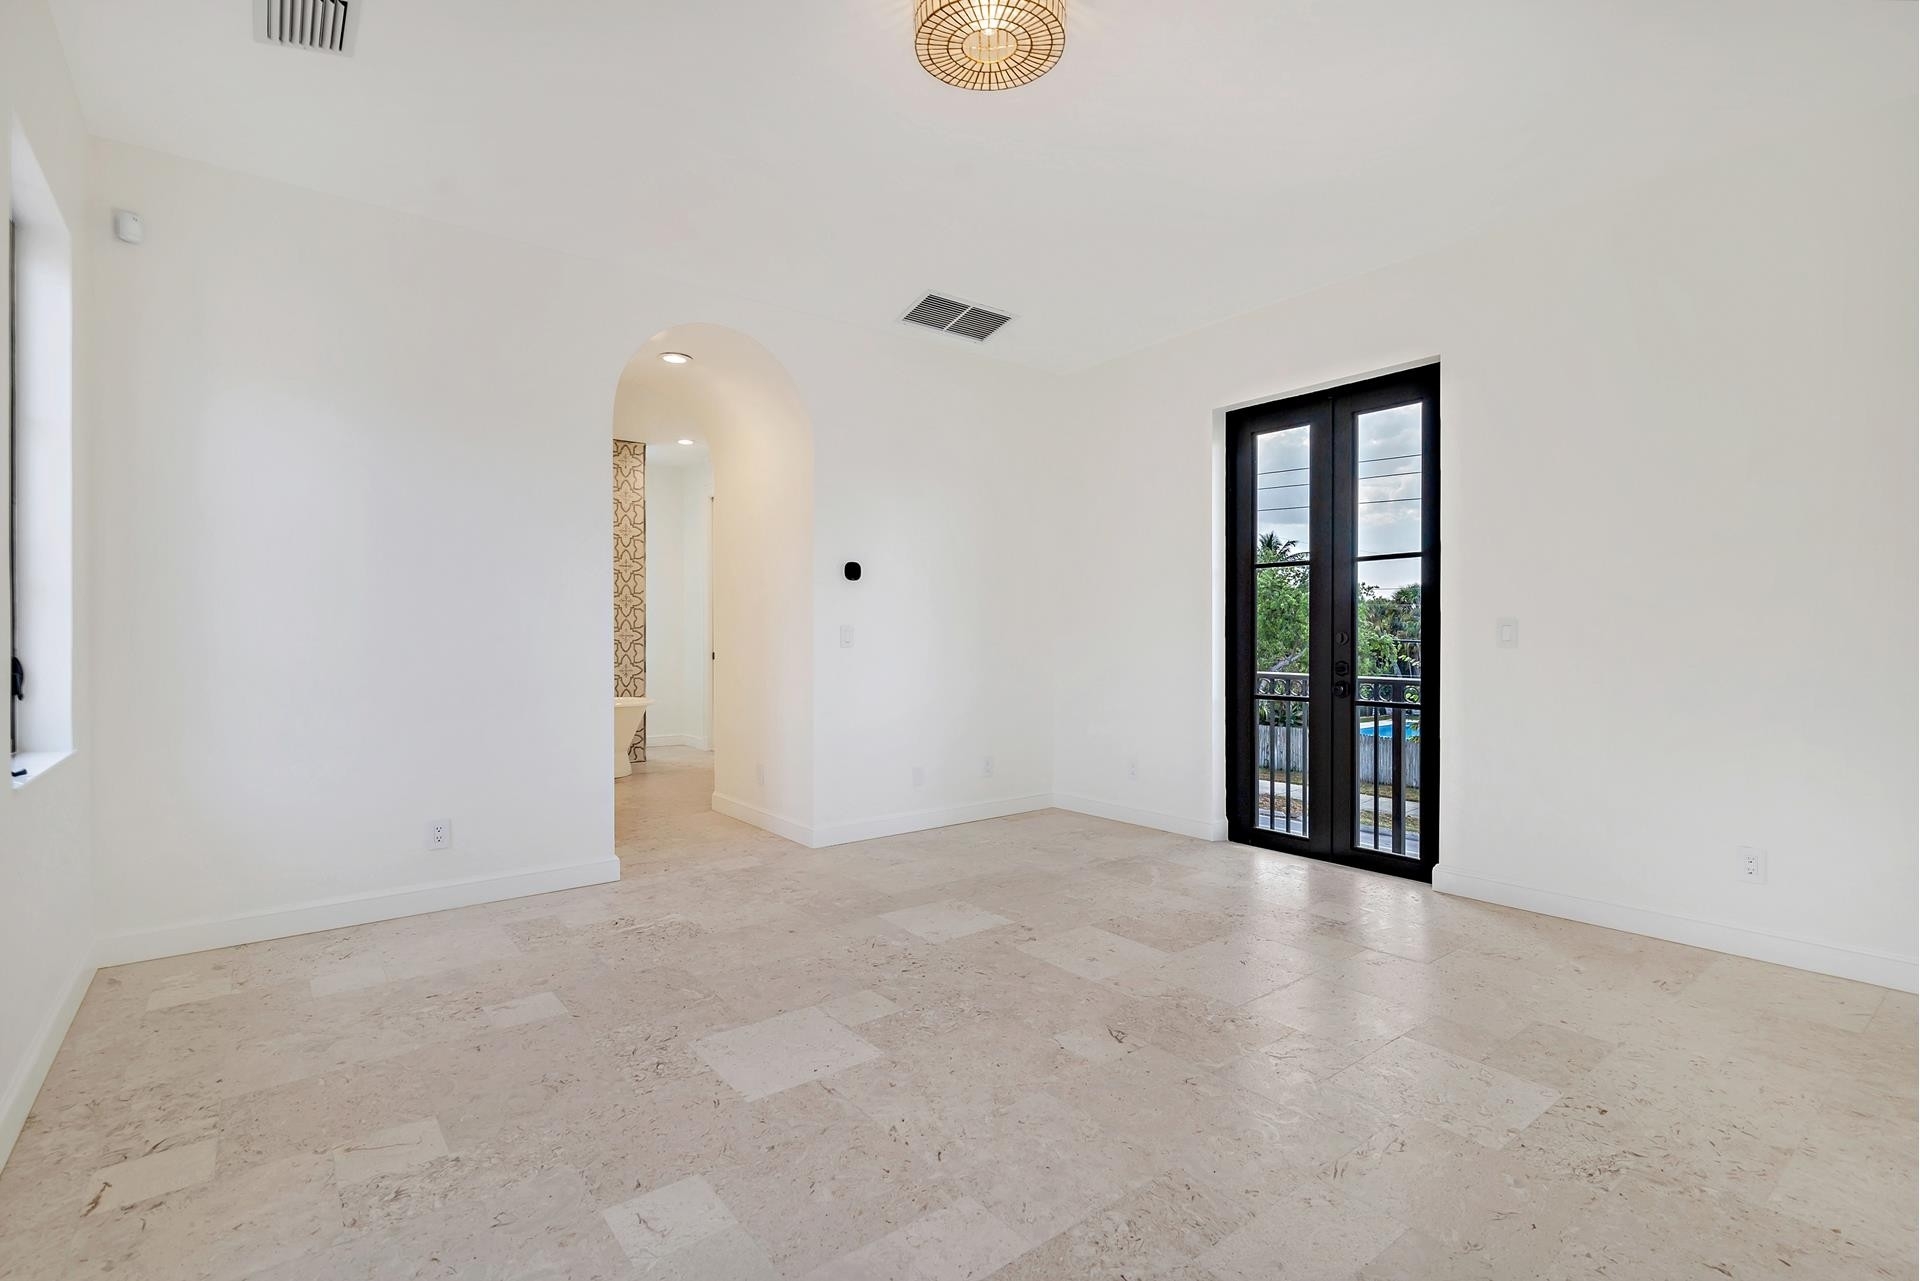 Single Family Home for Sale at South End, West Palm Beach, Florida 33405